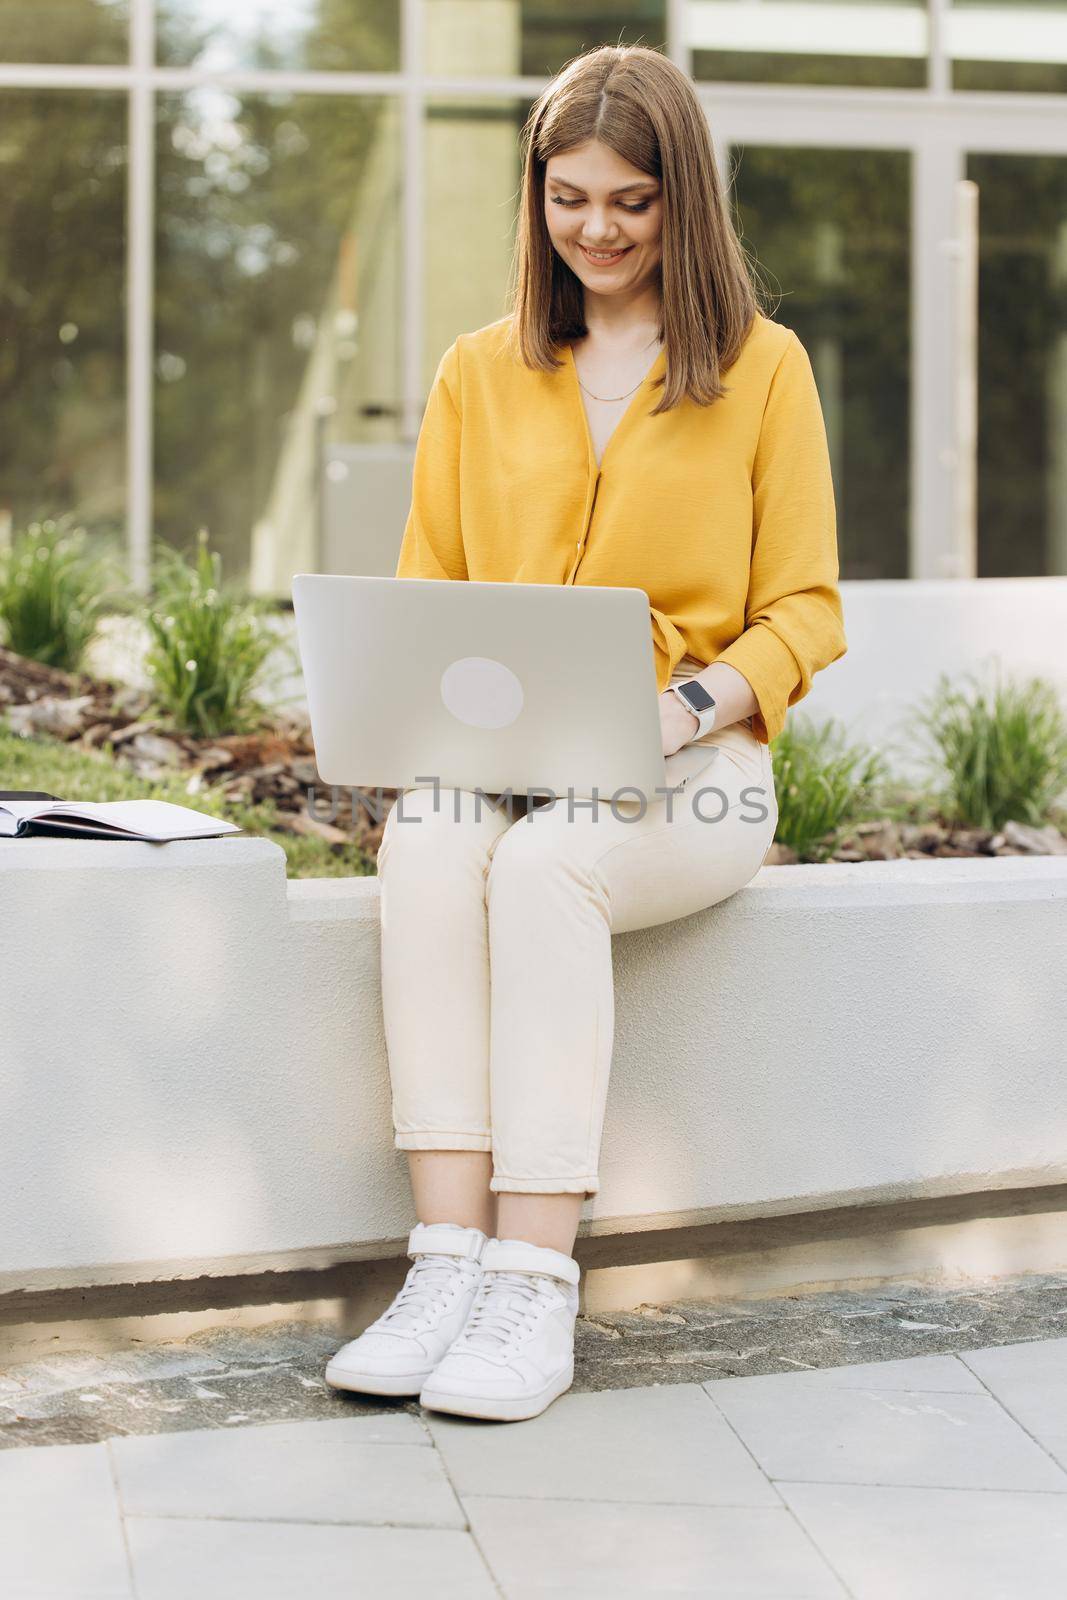 Focused business woman entrepreneur typing on laptop doing research. Young female professional girl using computer sitting outside office. Busy worker freelancer working on modern tech notebook device